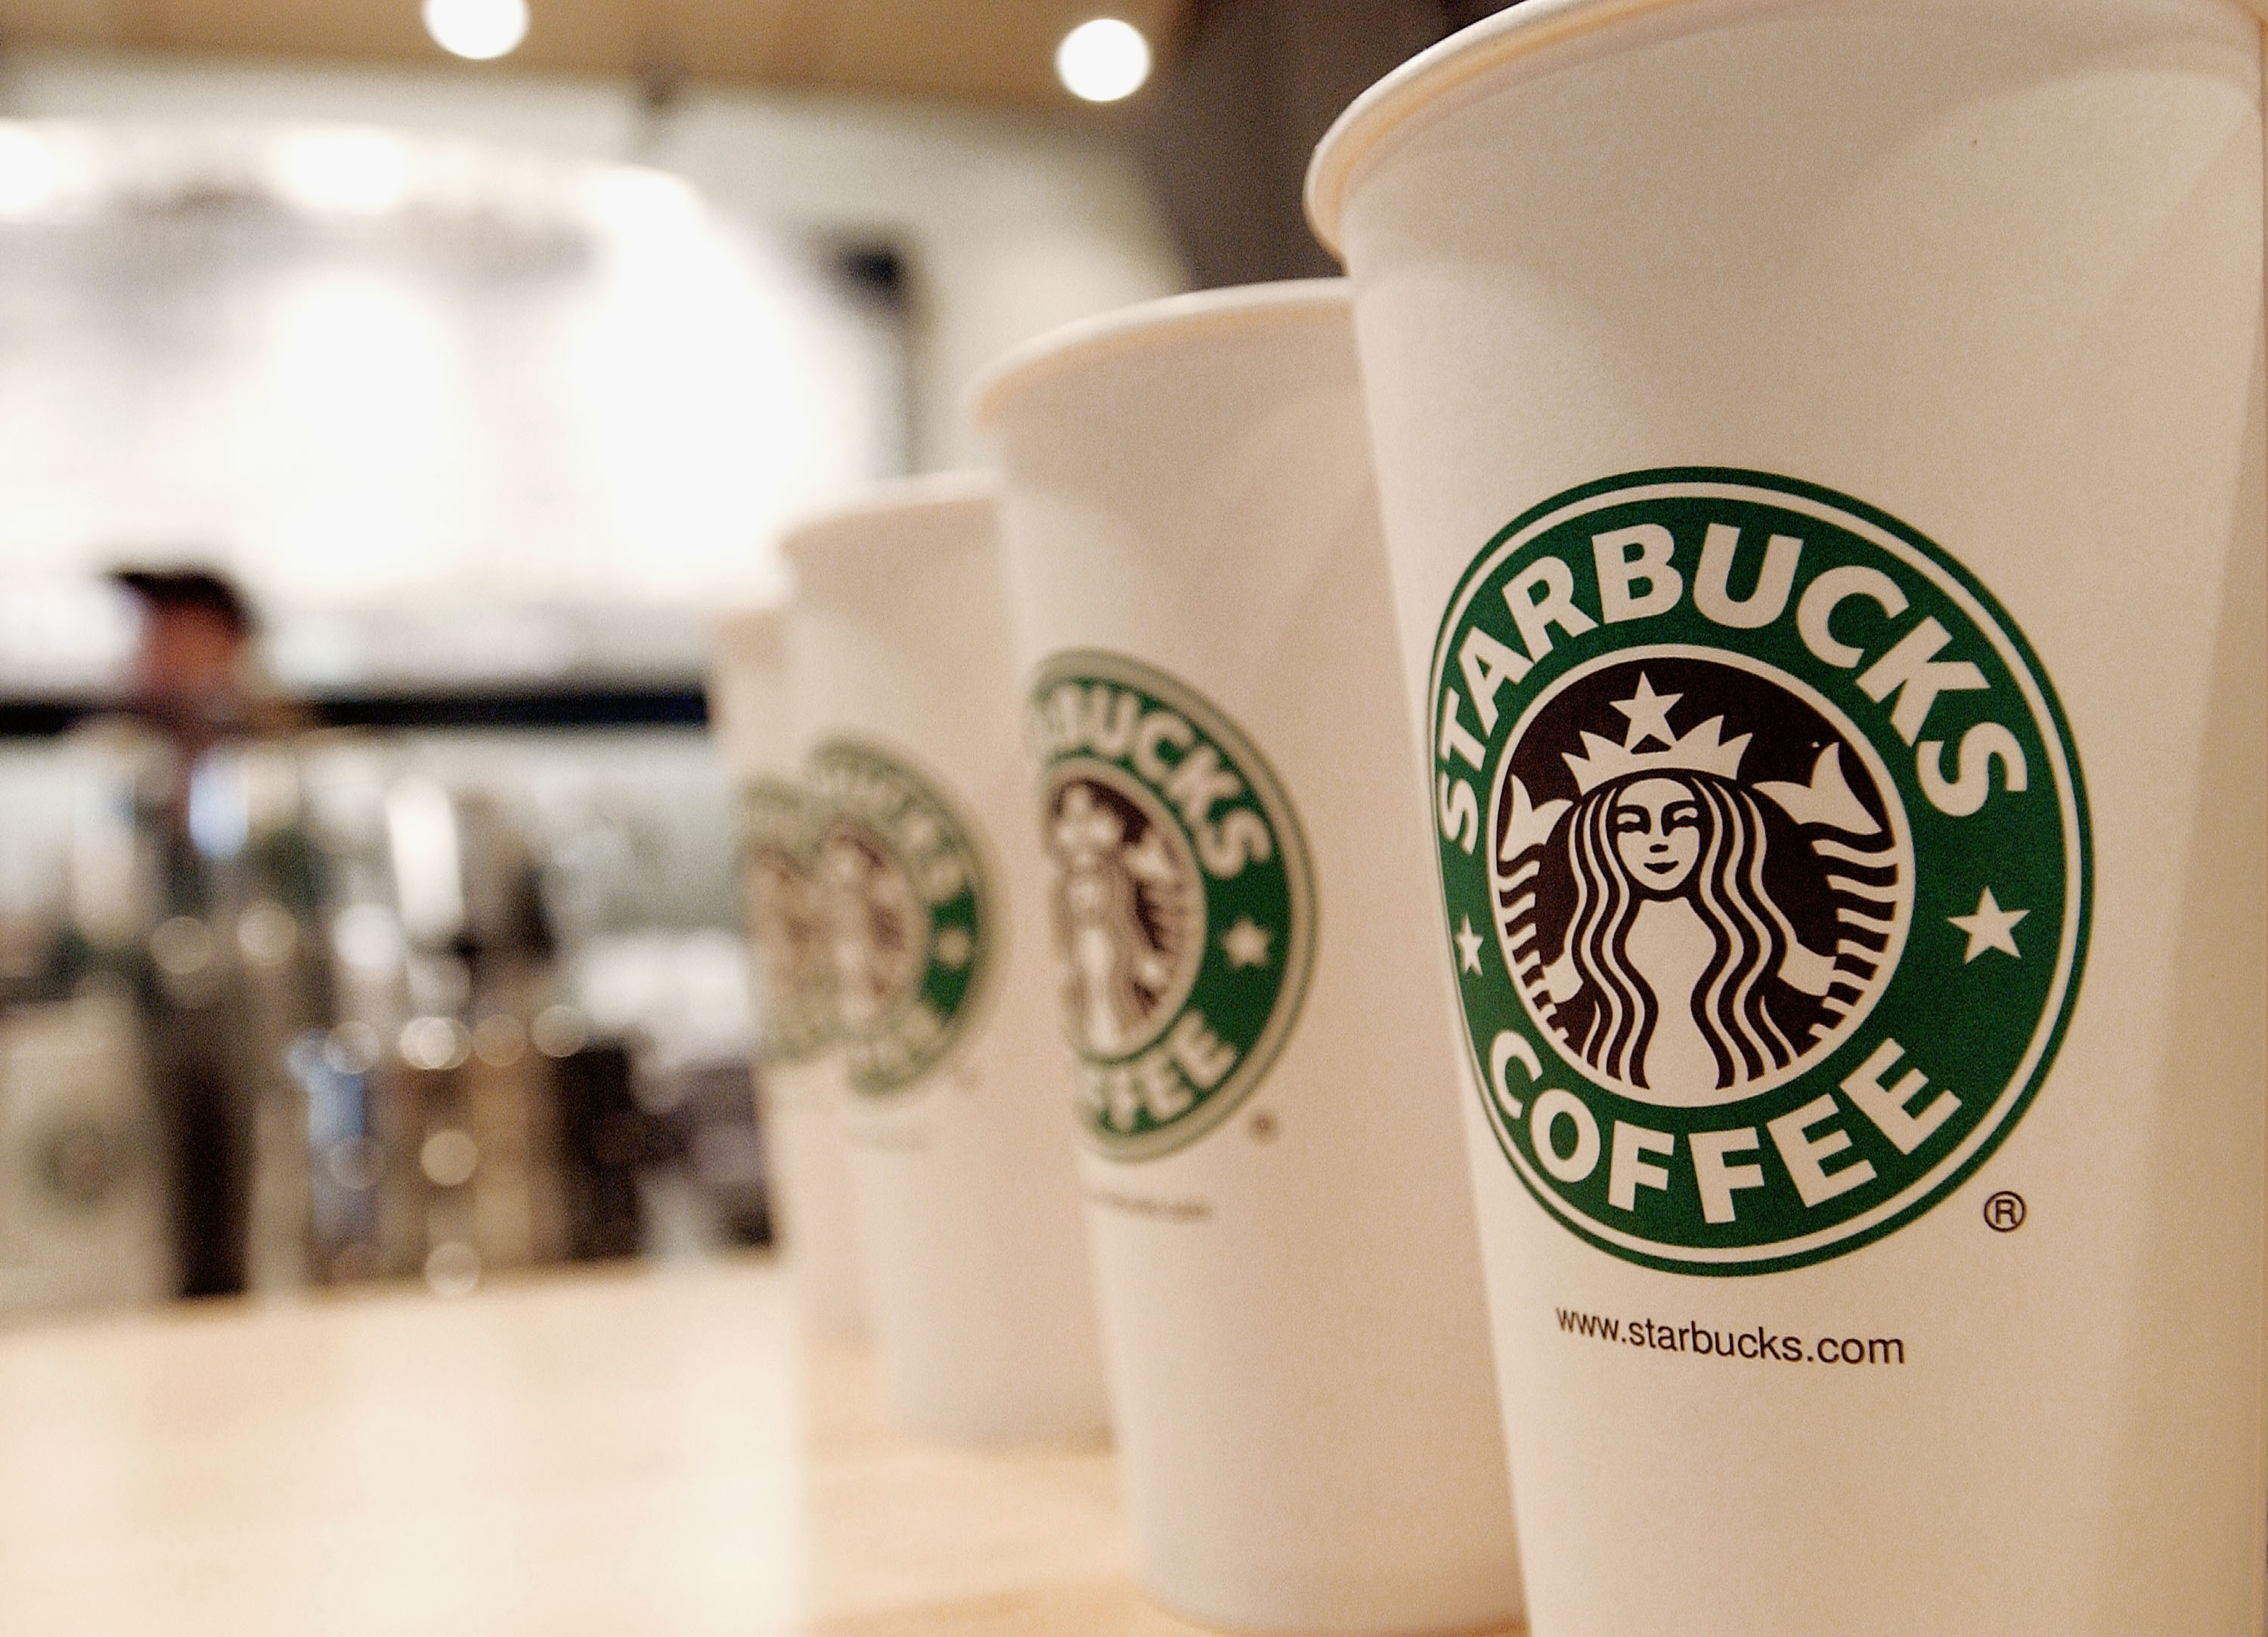 MSU Starbucks 'Campus Collection' mugs are in high demand - The State News